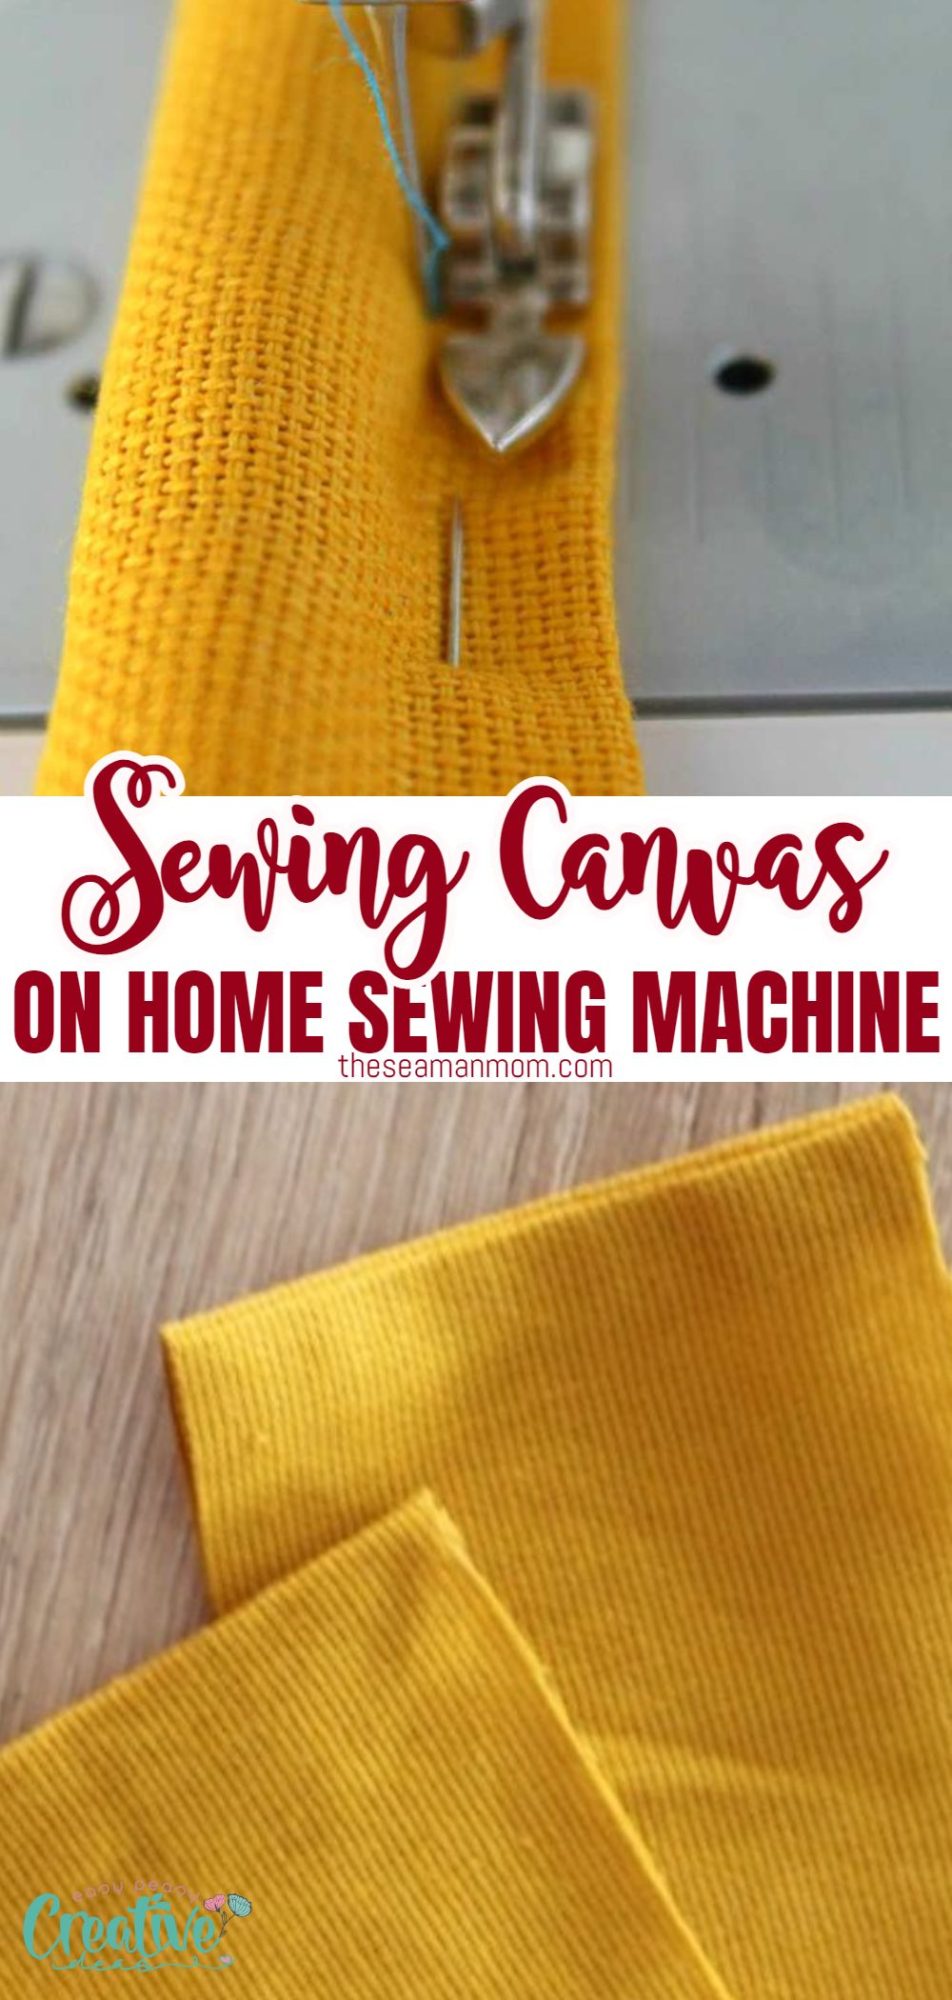 Photo collage illustrating tips for sewing canvas with a home sewing machine